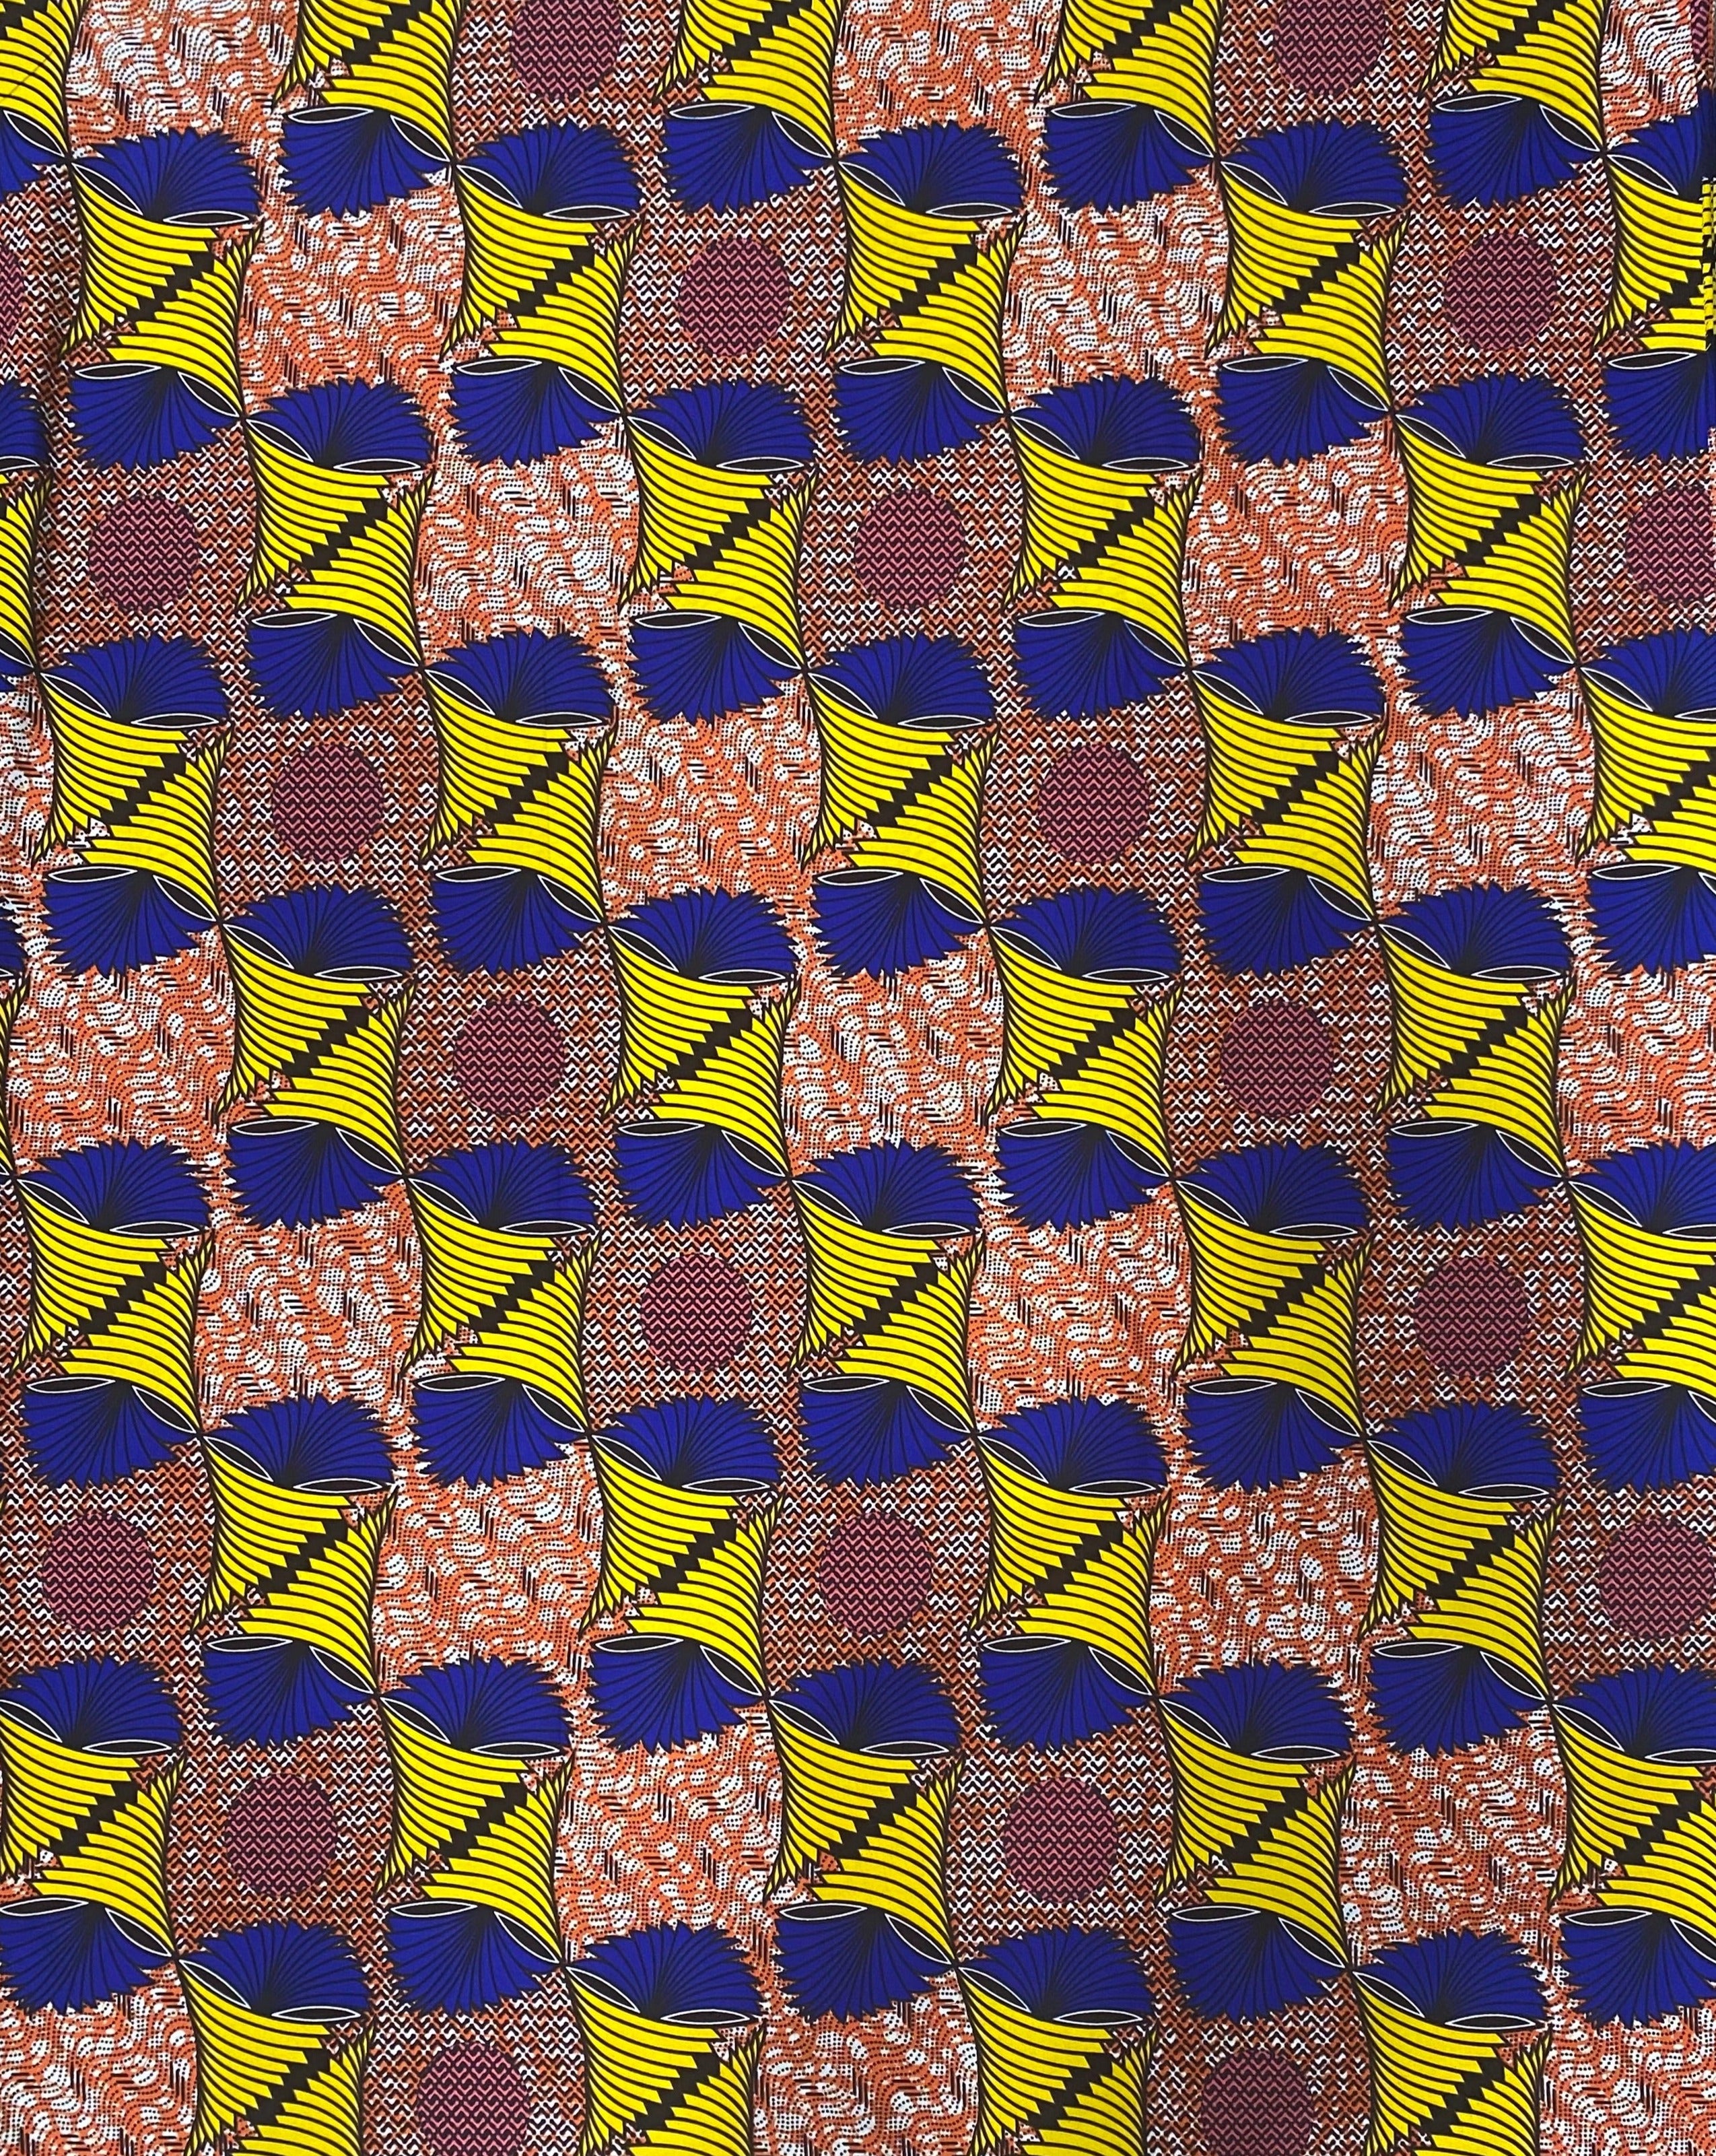 Optical Illusion African Print Fabric - 100% Cotton, 44" Wide, Mesmerizingly Modern